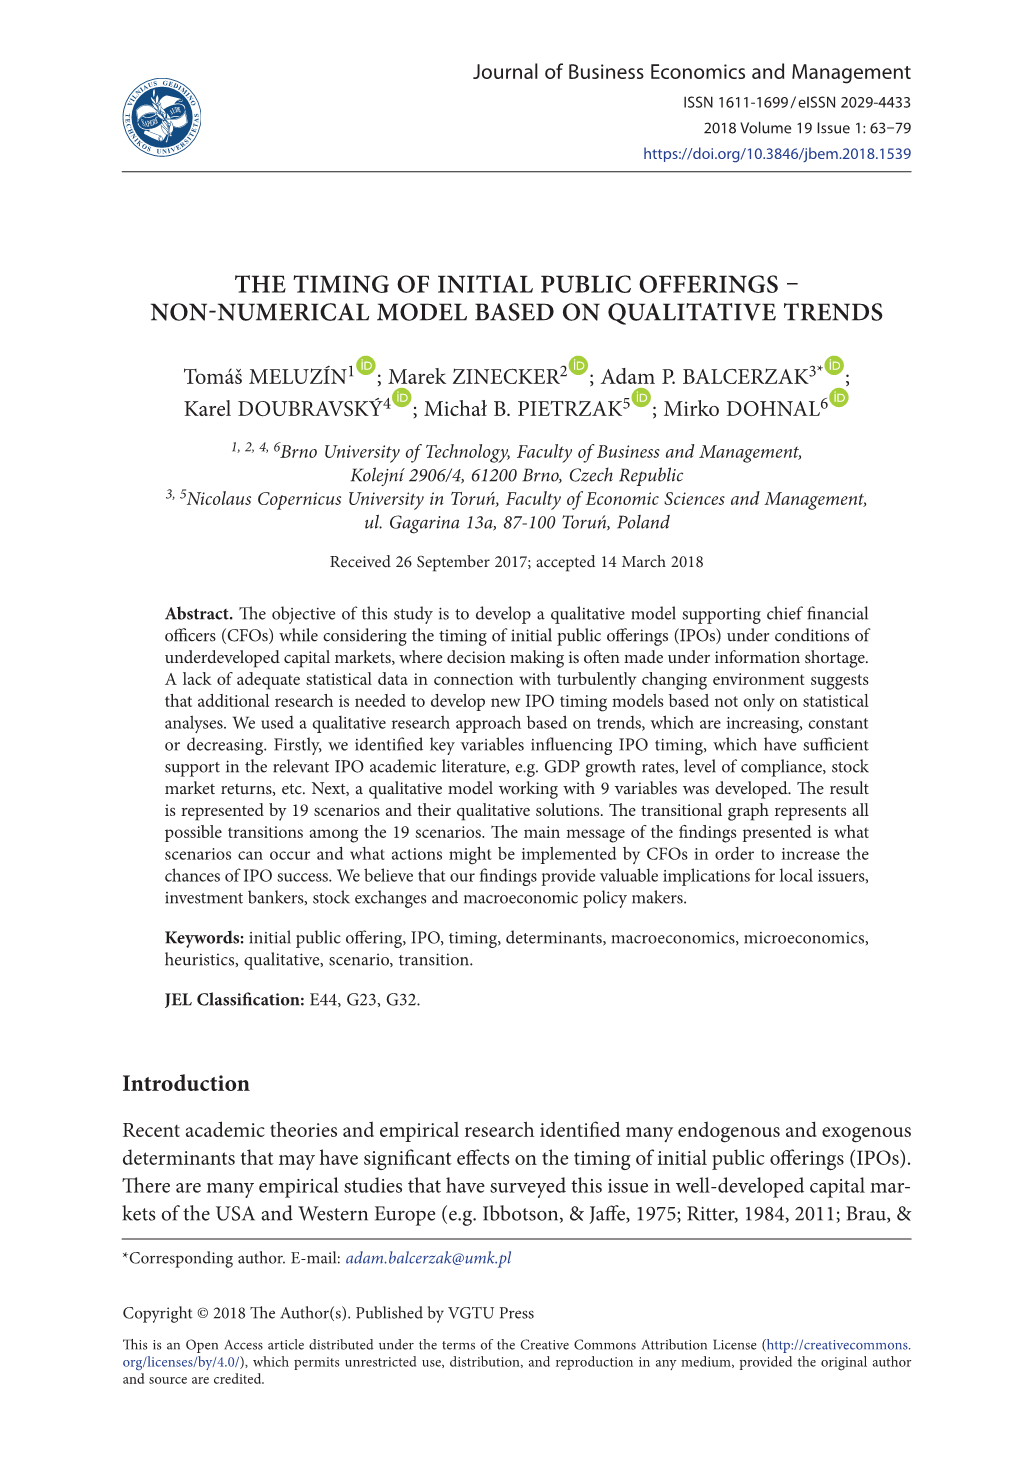 The Timing of Initial Public Offerings – Non-Numerical Model Based on Qualitative Trends